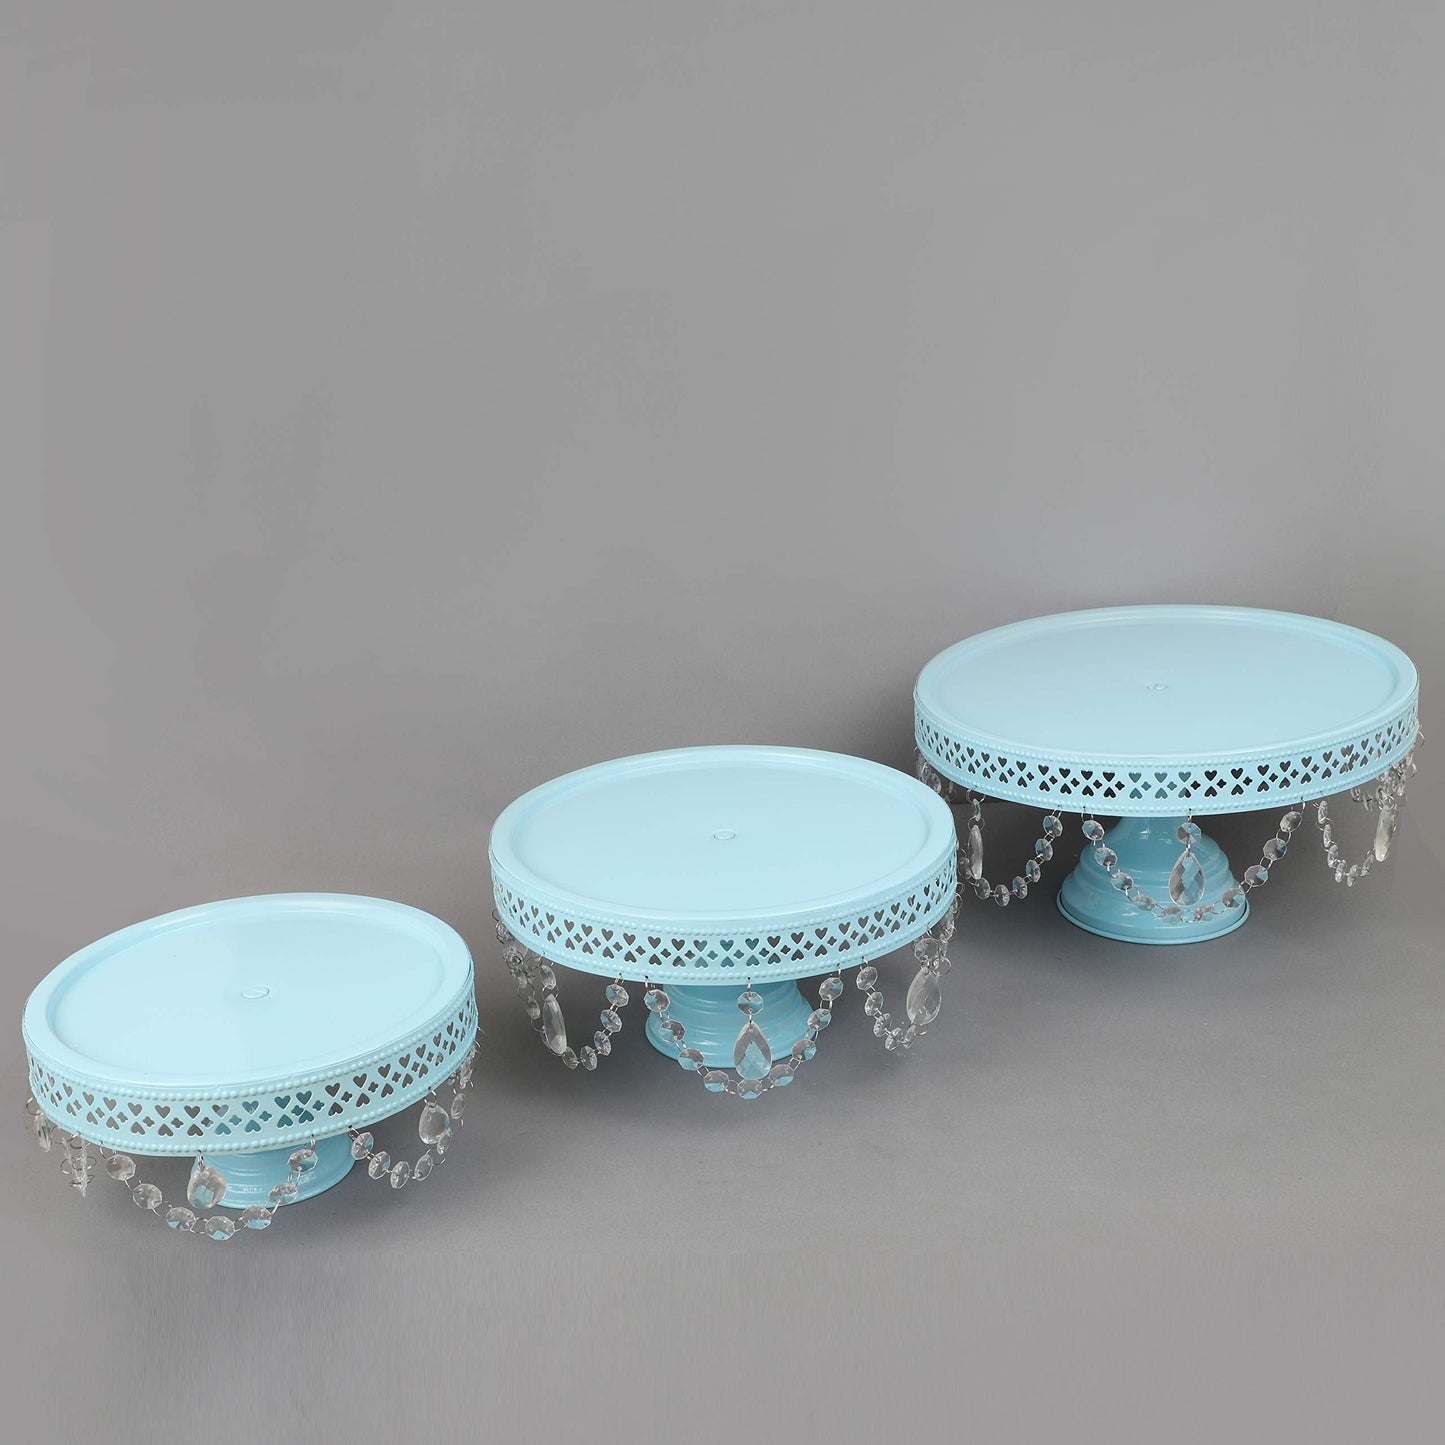 GiftBay Creations - Cake Stand Pedestal Round Strong Metal with Clear Hanging Crystals Set/3 (9-Inch, 11-Inch, 13-Inch, Sky Blue)